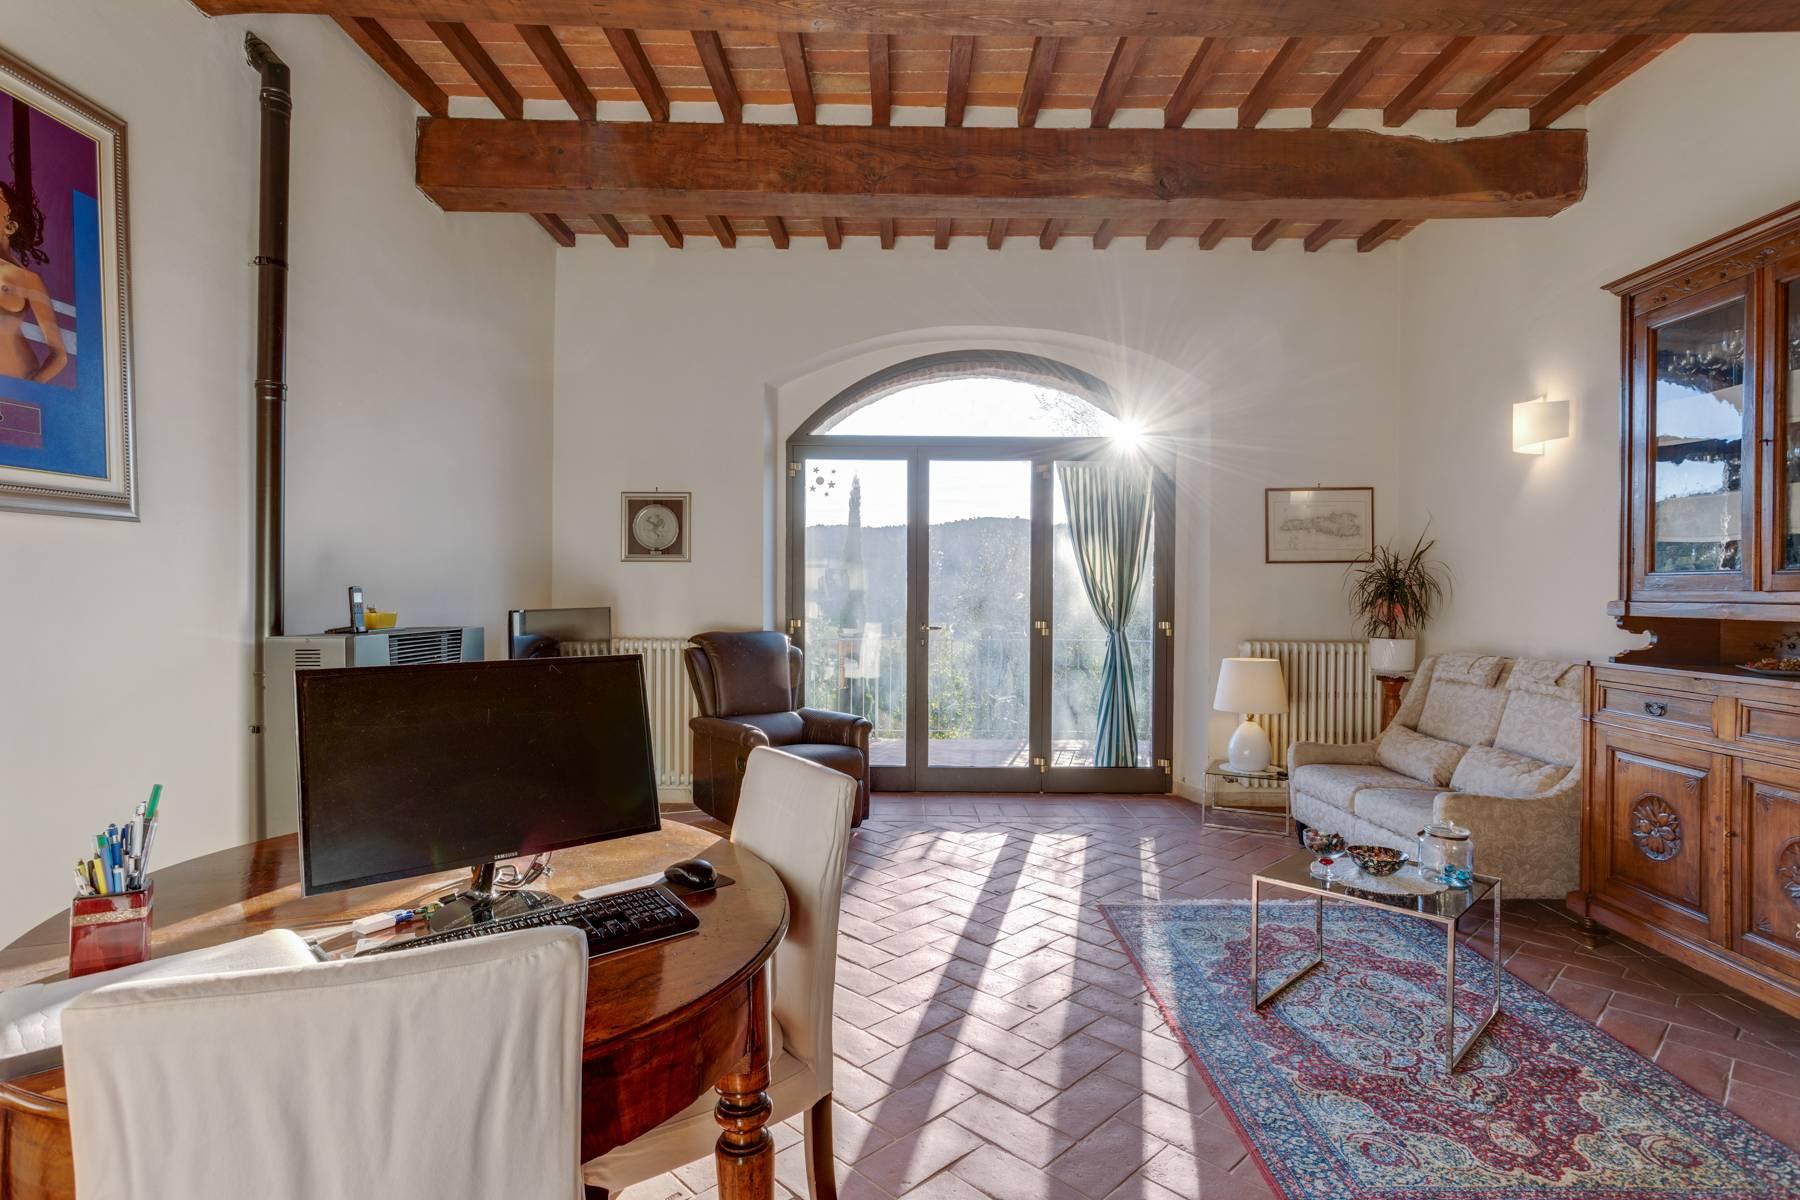 Beautiful country house with agriturismo and vineyard walking distance from Montepulciano - 17